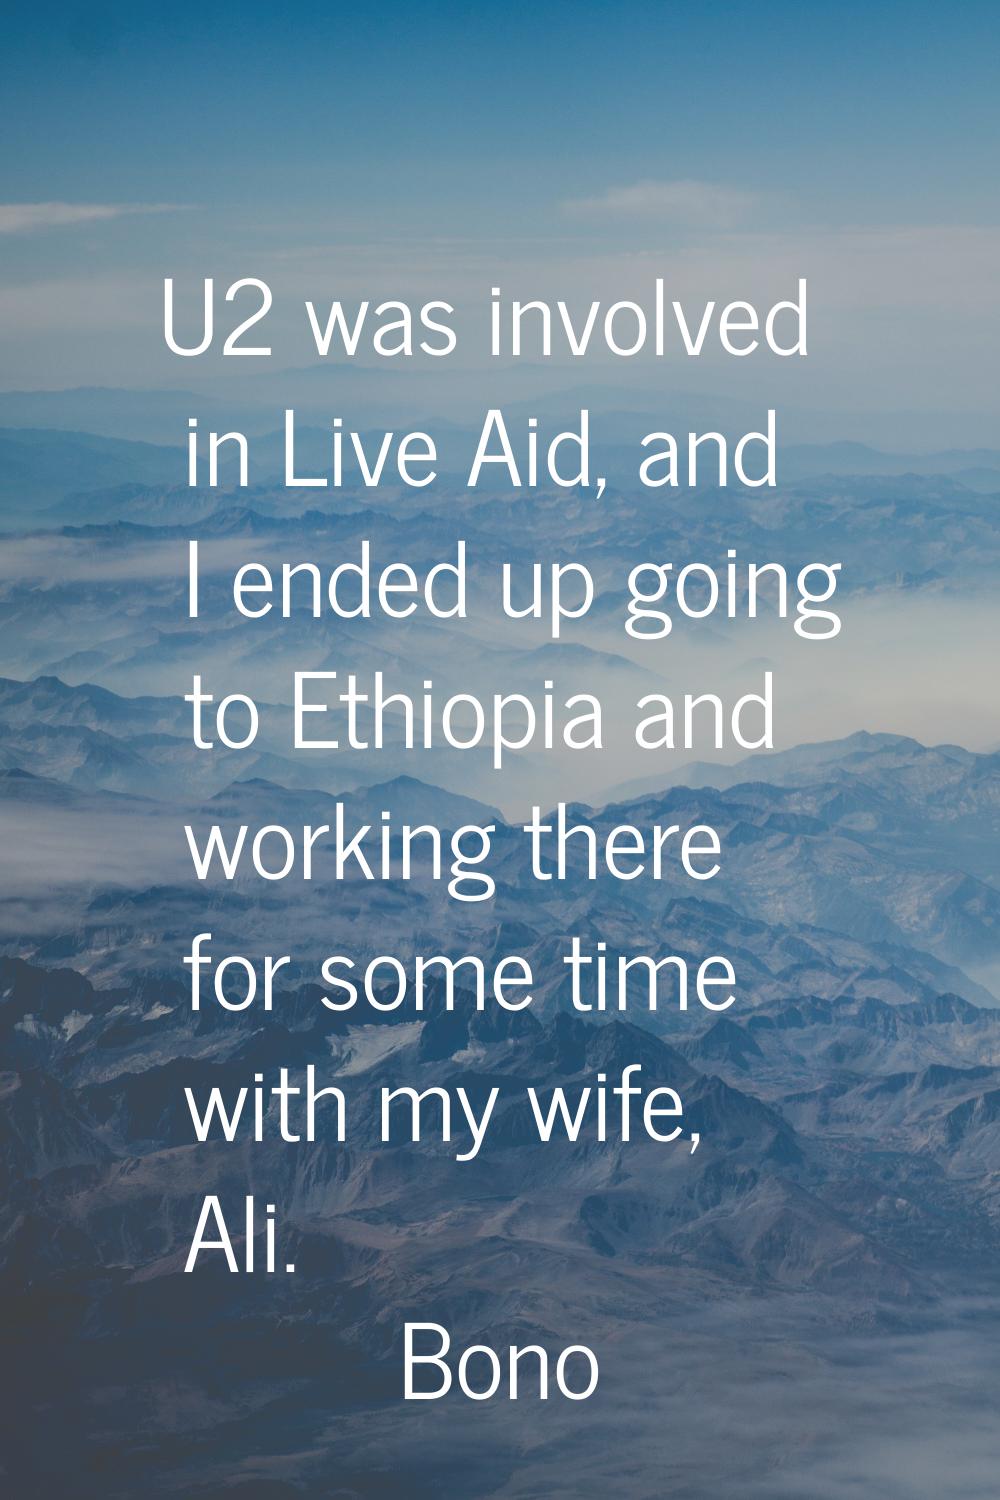 U2 was involved in Live Aid, and I ended up going to Ethiopia and working there for some time with 